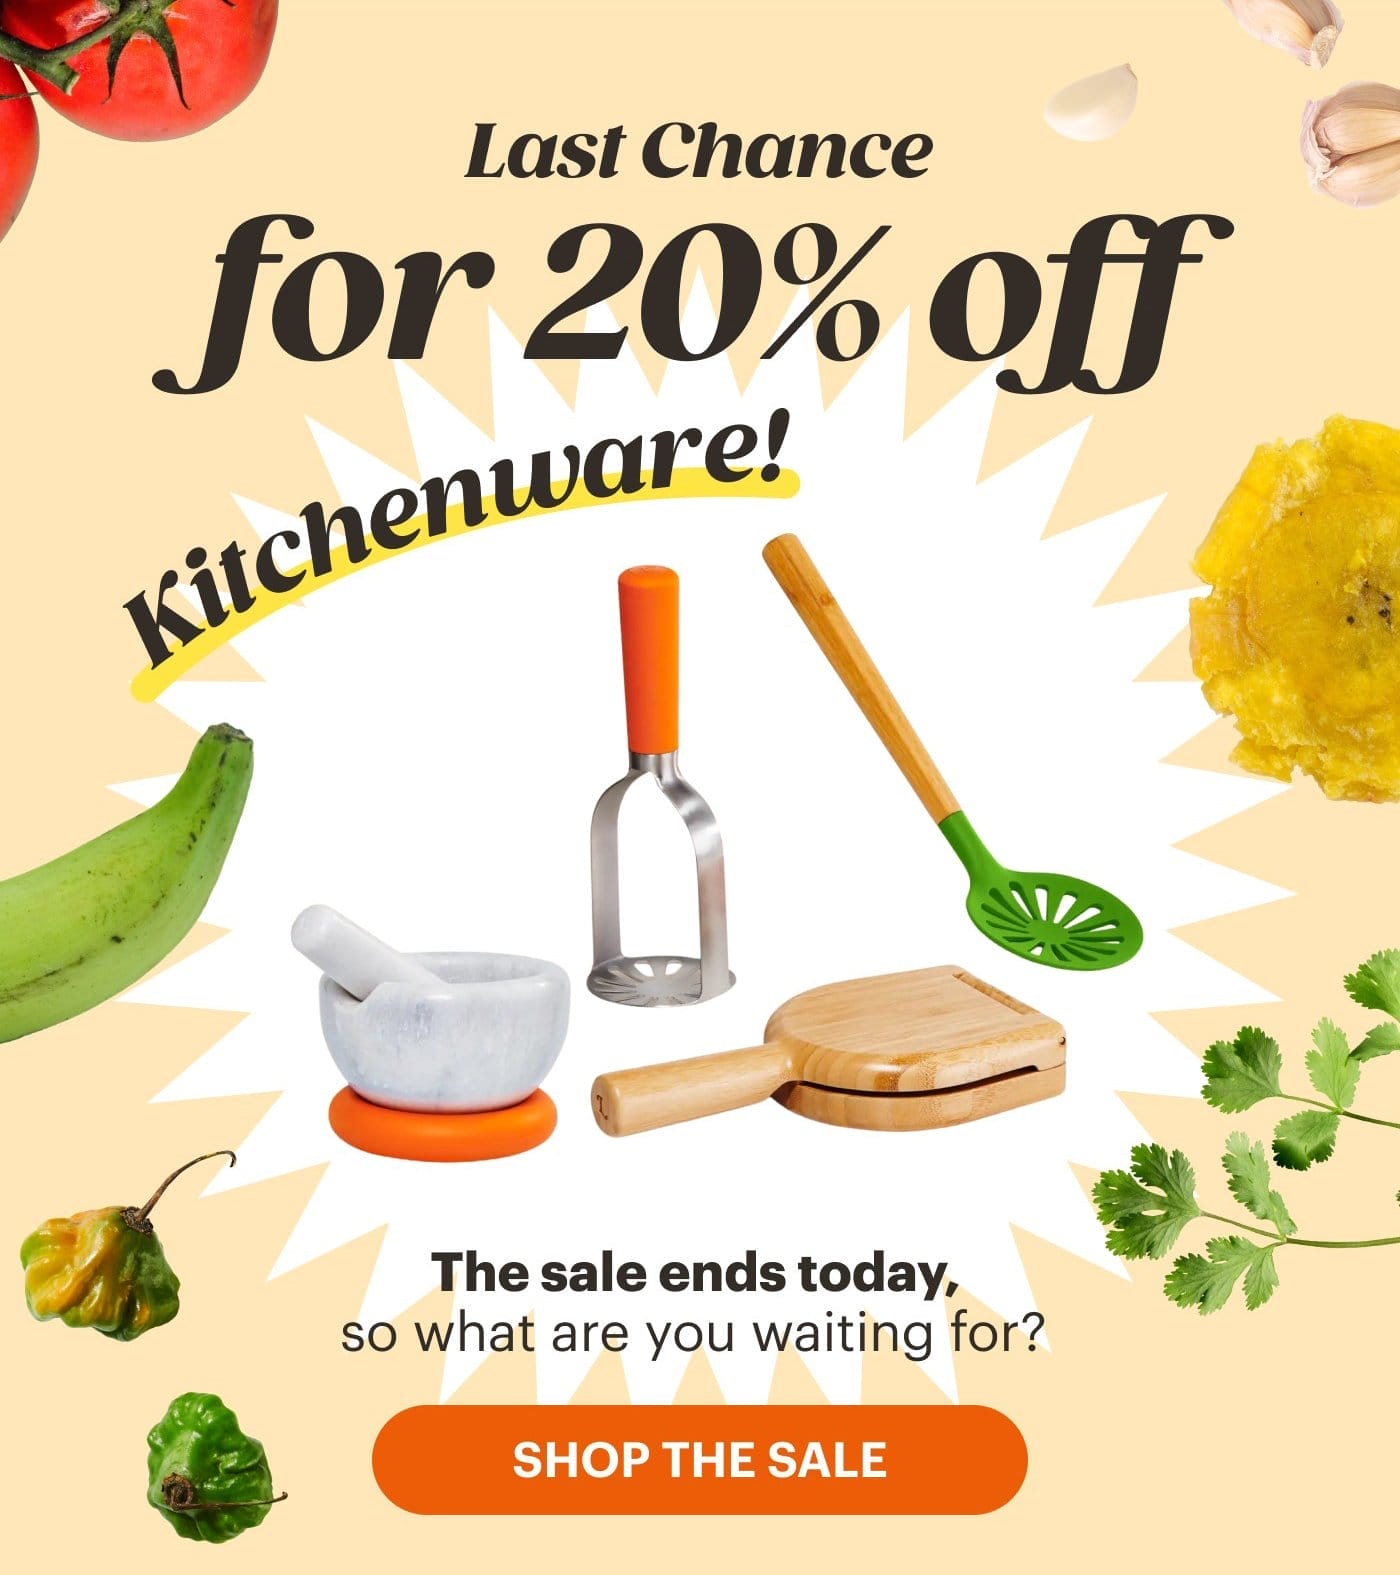 Last Chance for 20% Off Kitchenware! SHOP THE SALE